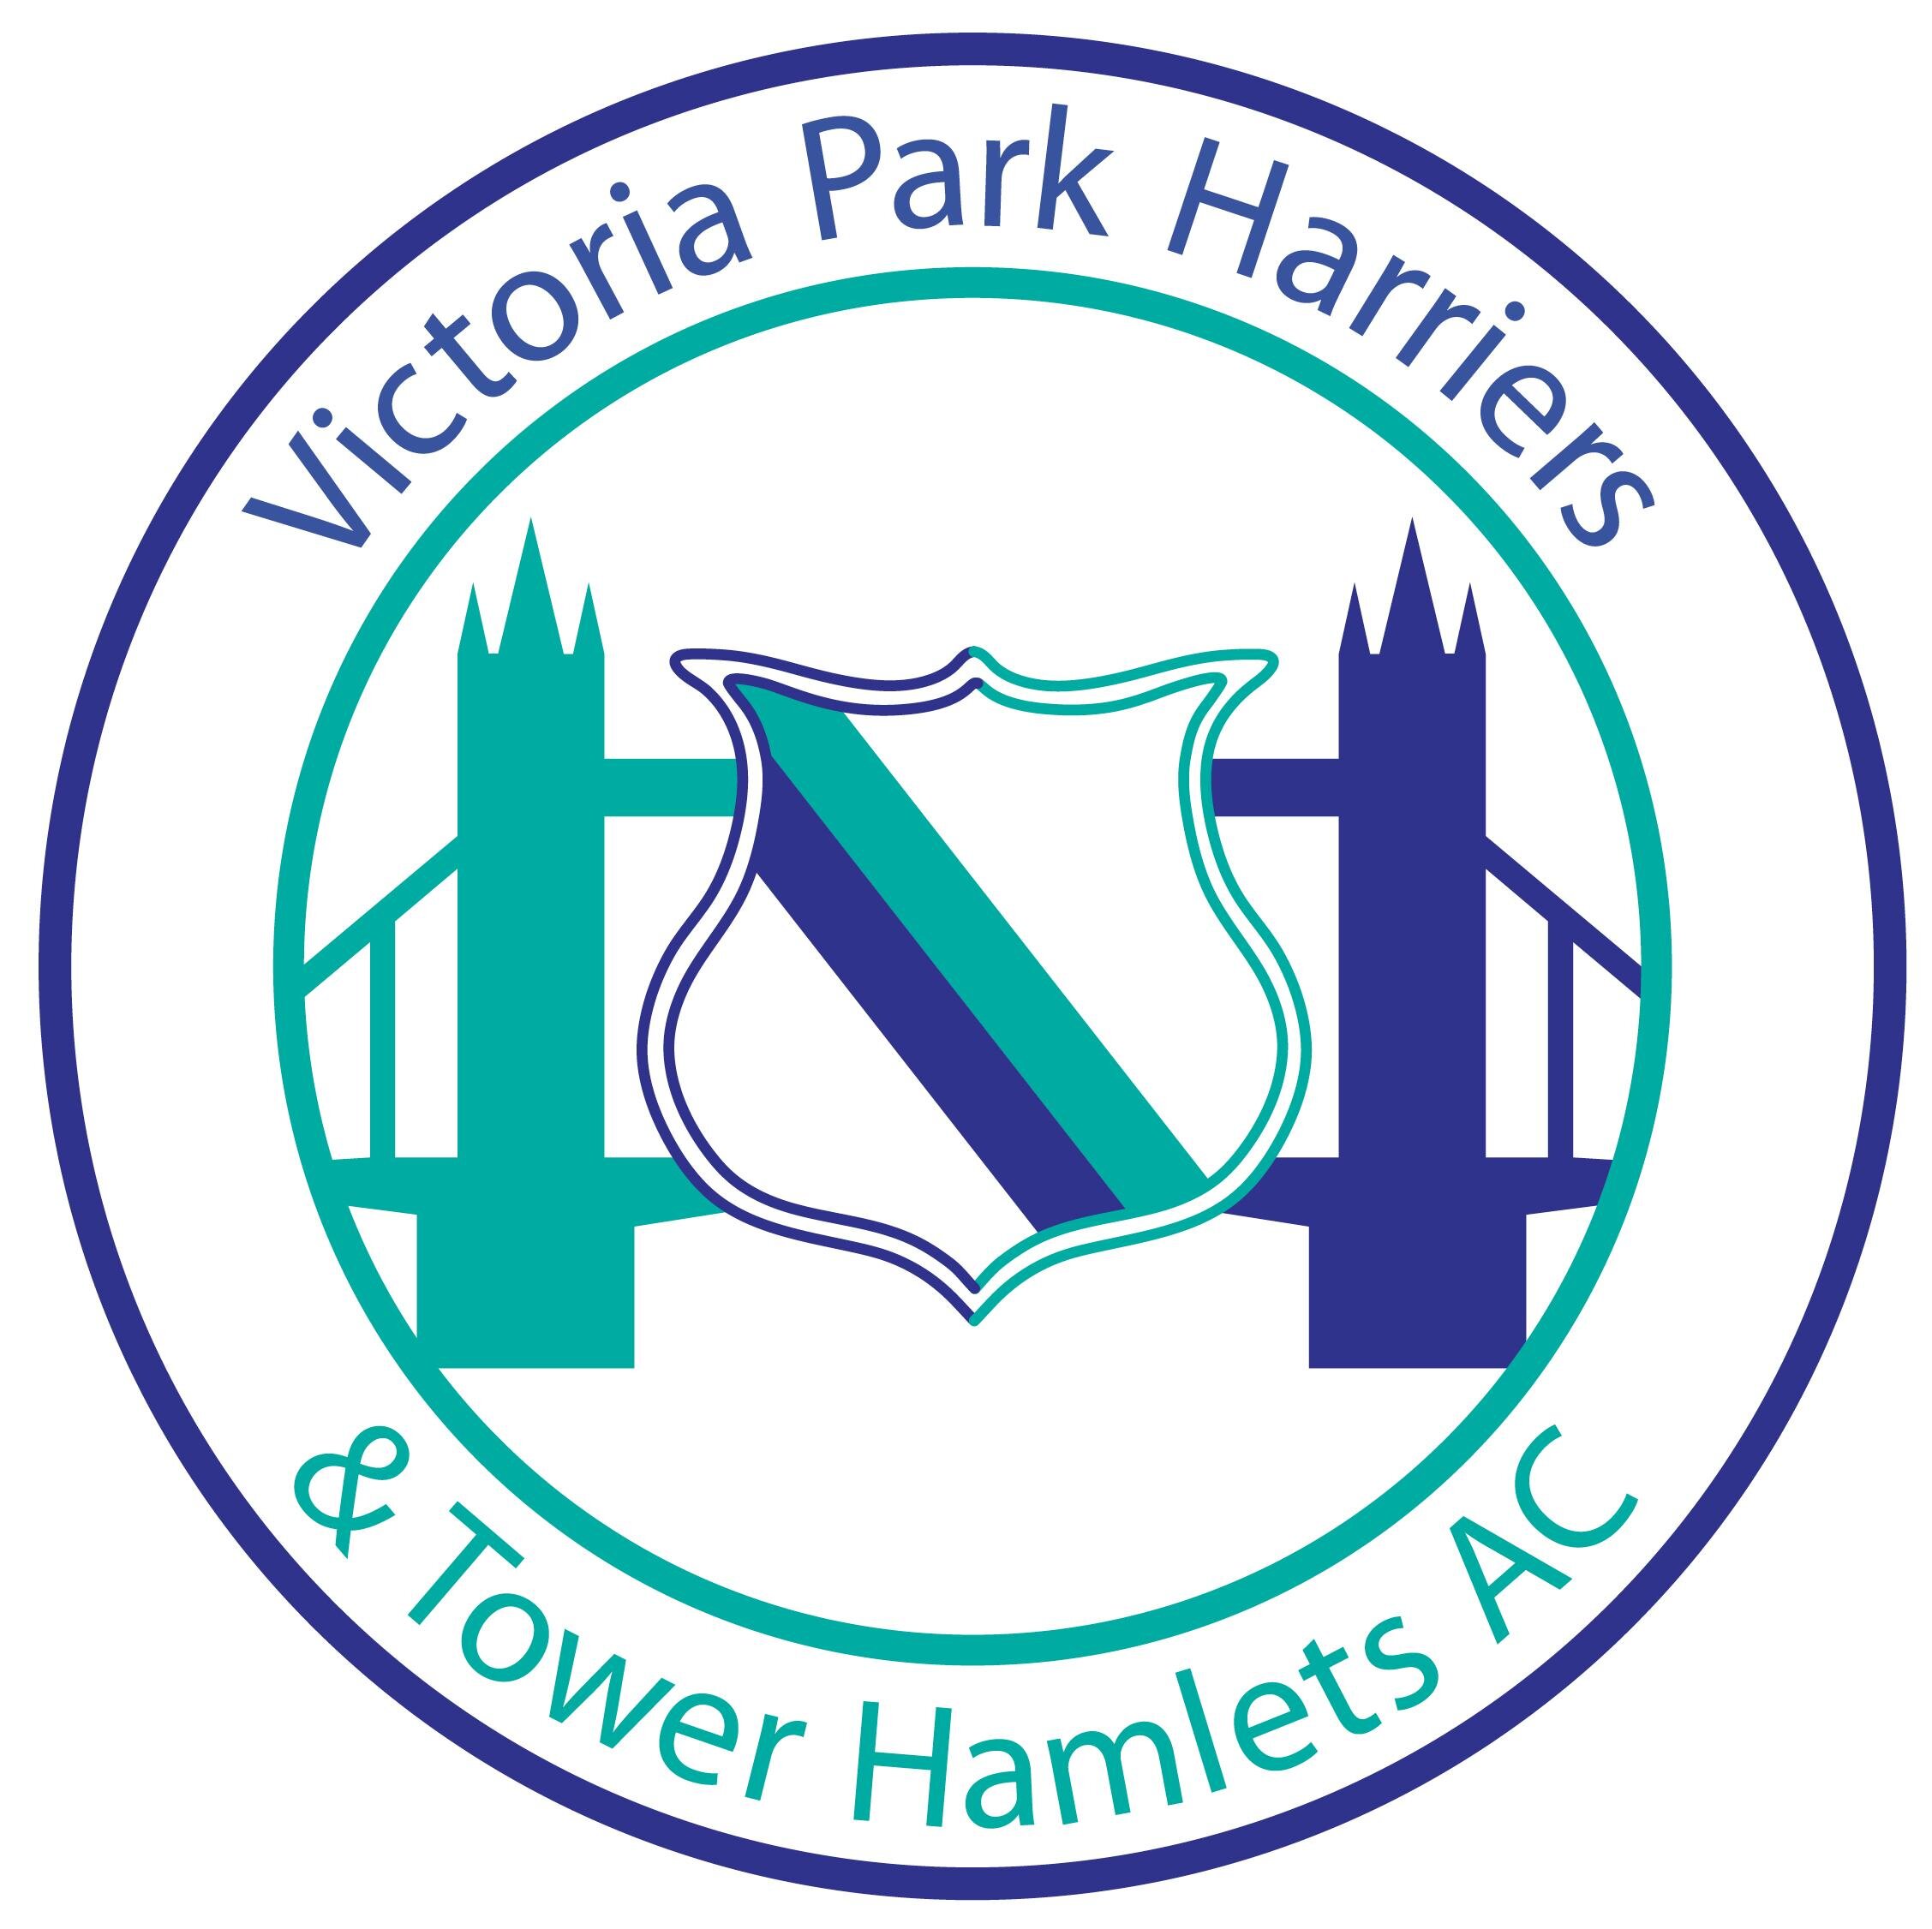 Victoria Park Harriers & Tower Hamlets Athletics Club. Friendly east London club for all abilities, from beginner to world class. Track, field, road, XC & fell.